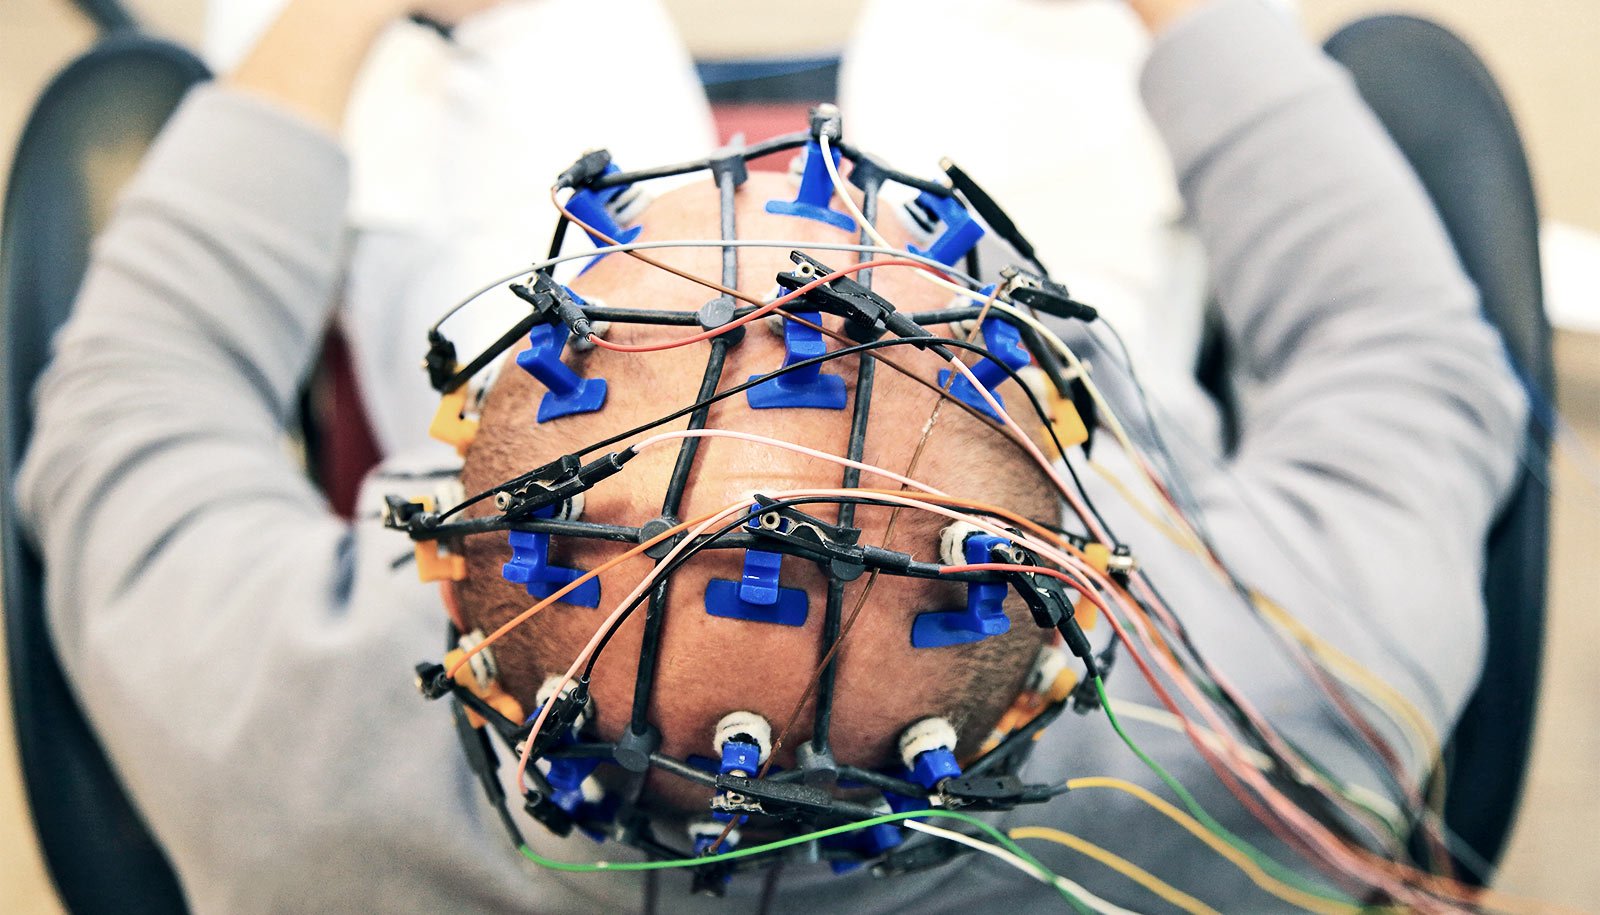 EEG scans can detect signs of Parkinson